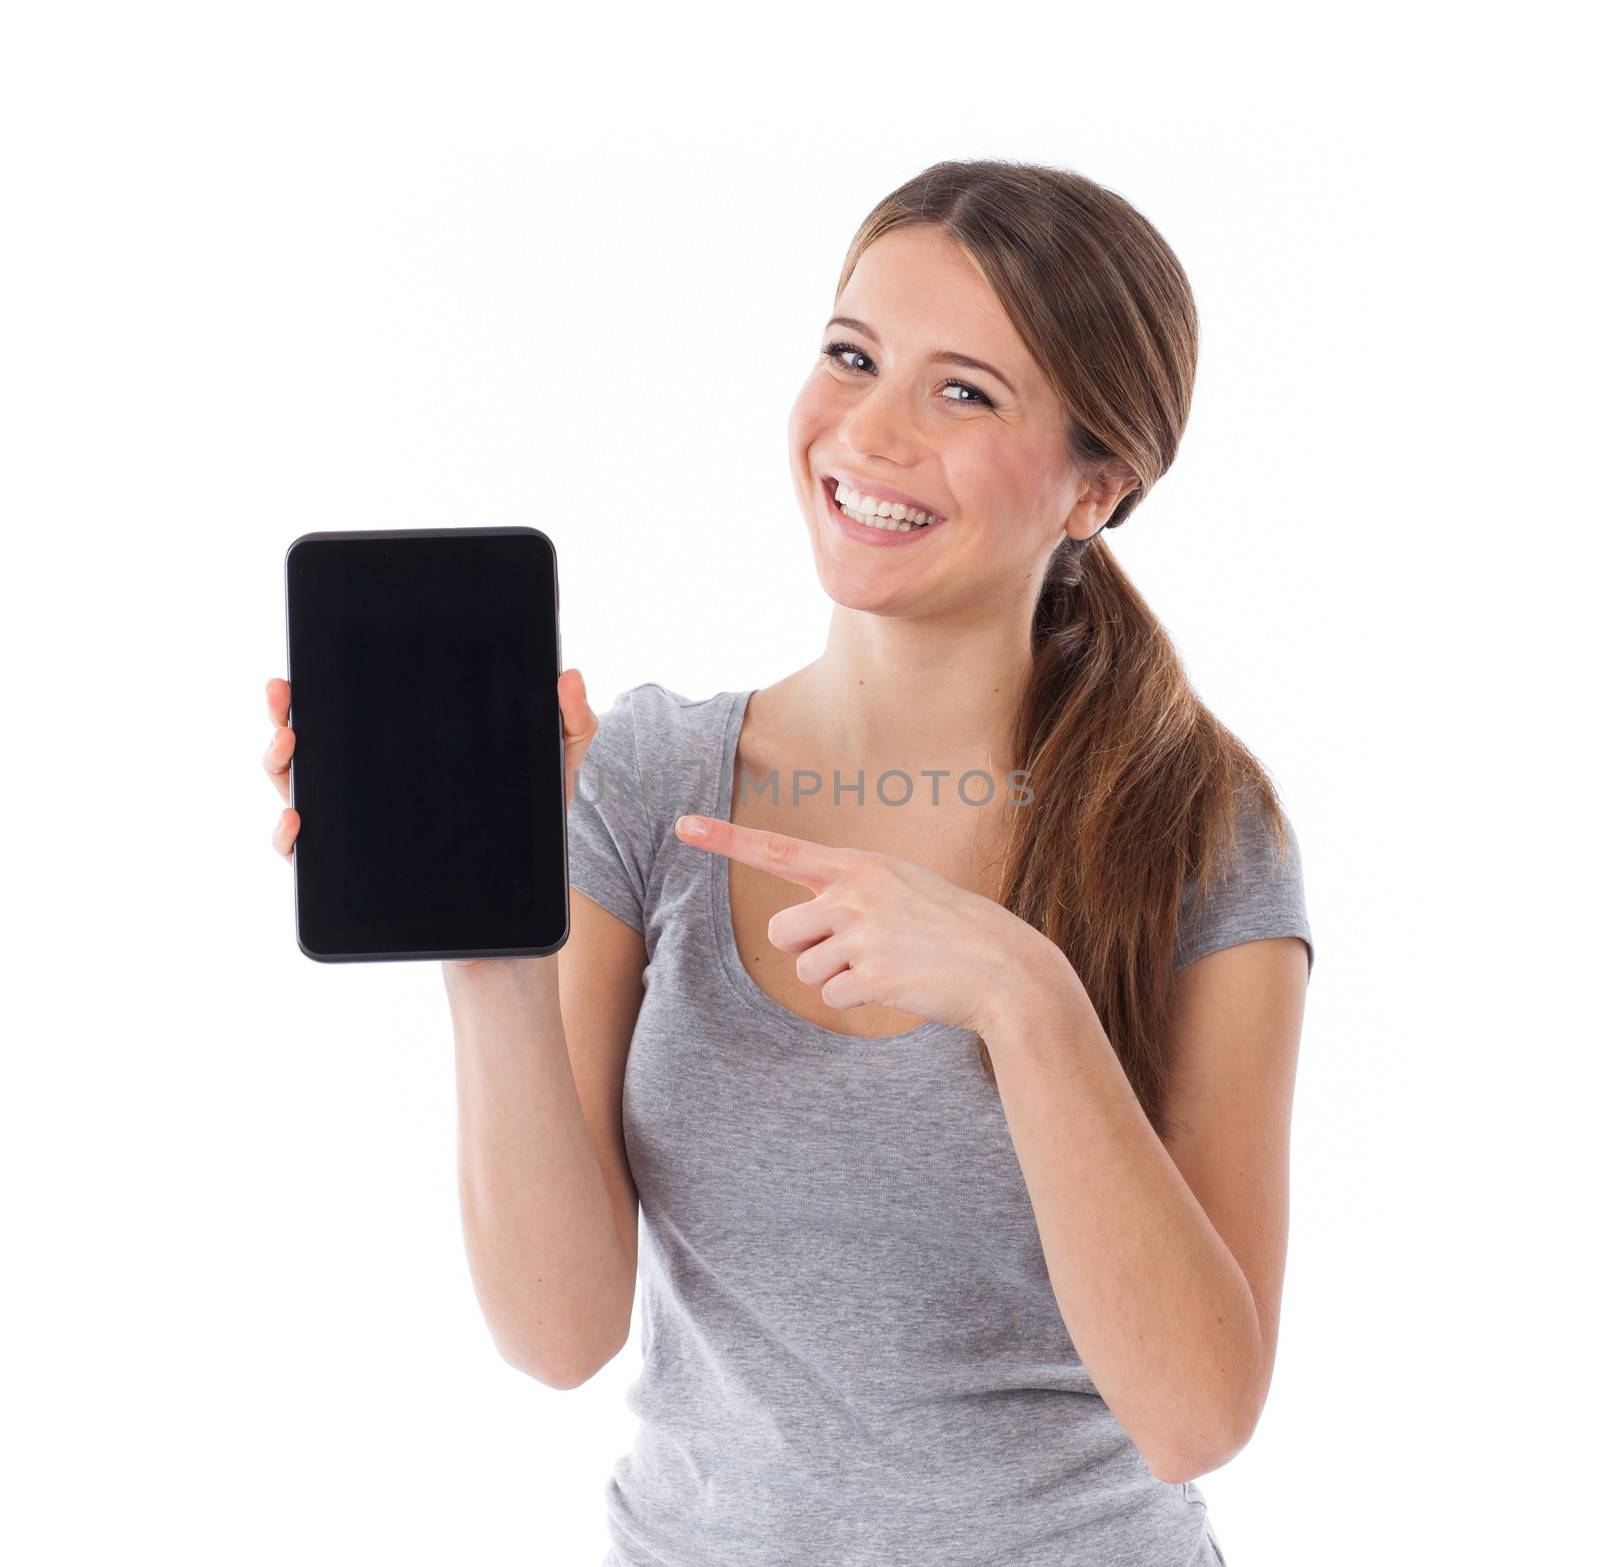 Cheerful woman presenting a blank electronic tablet, communication concept